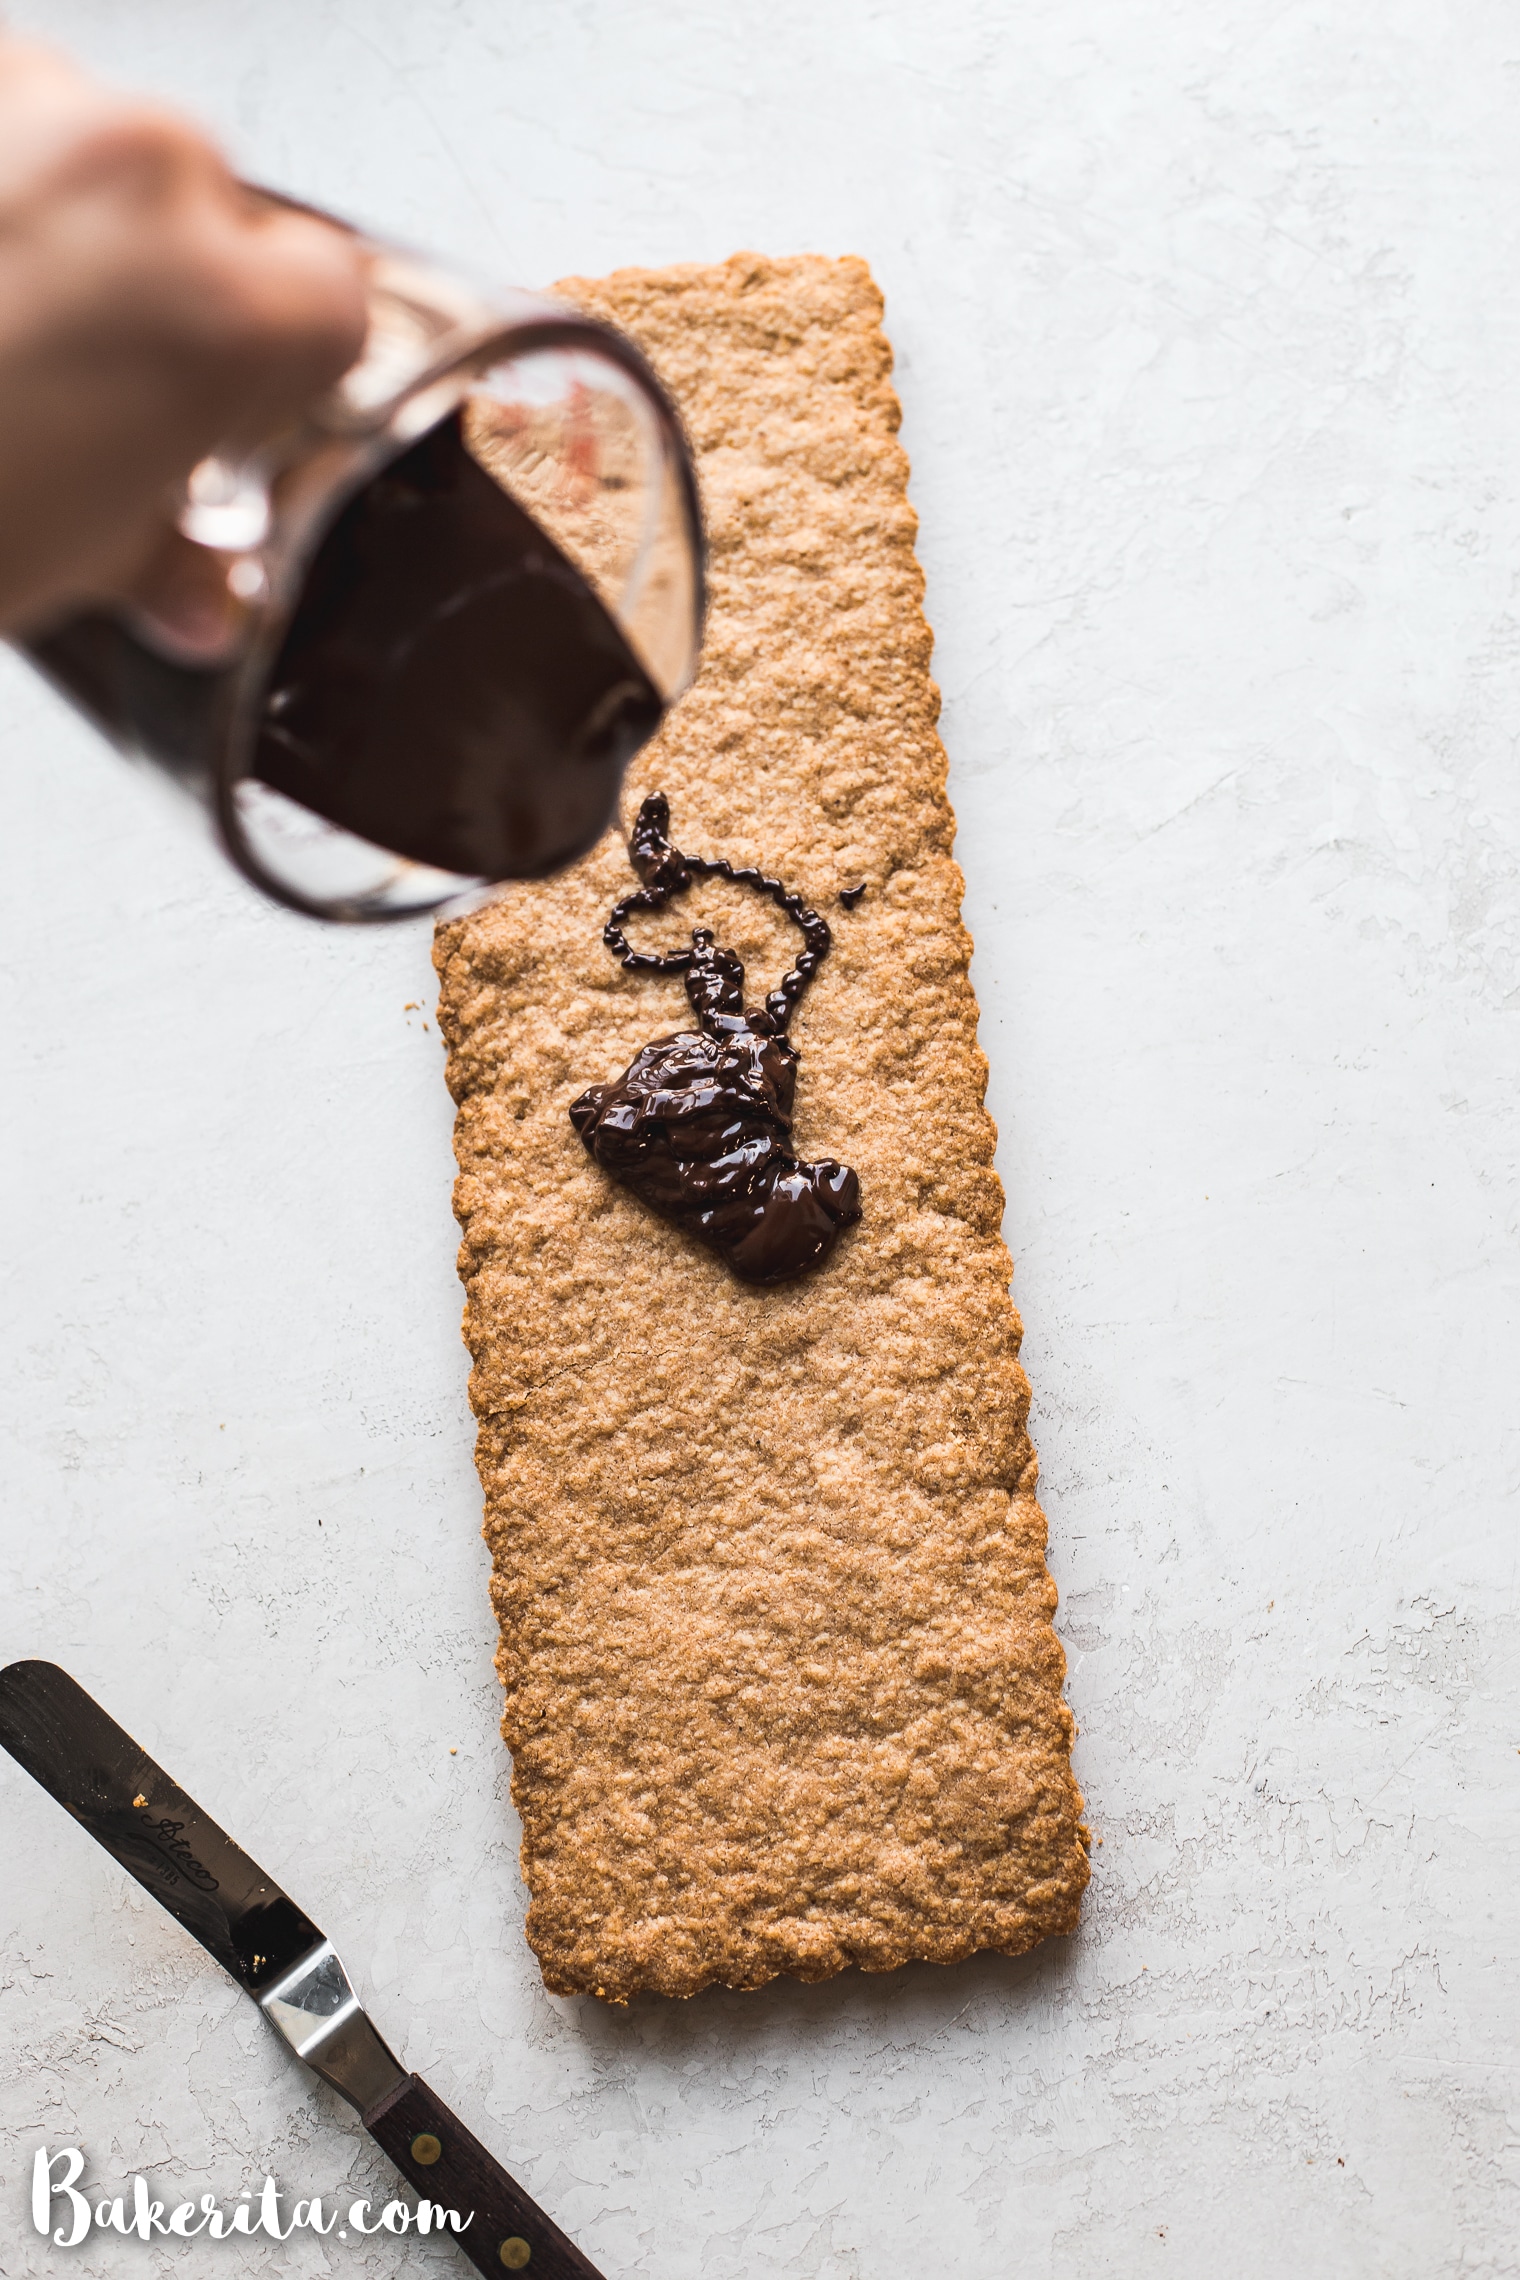 This Gluten-Free Vegan Shortbread recipe tastes rich and buttery - without the butter. This simple recipe is made with just FOUR ingredients and can be topped with chocolate for an extra-special holiday treat.